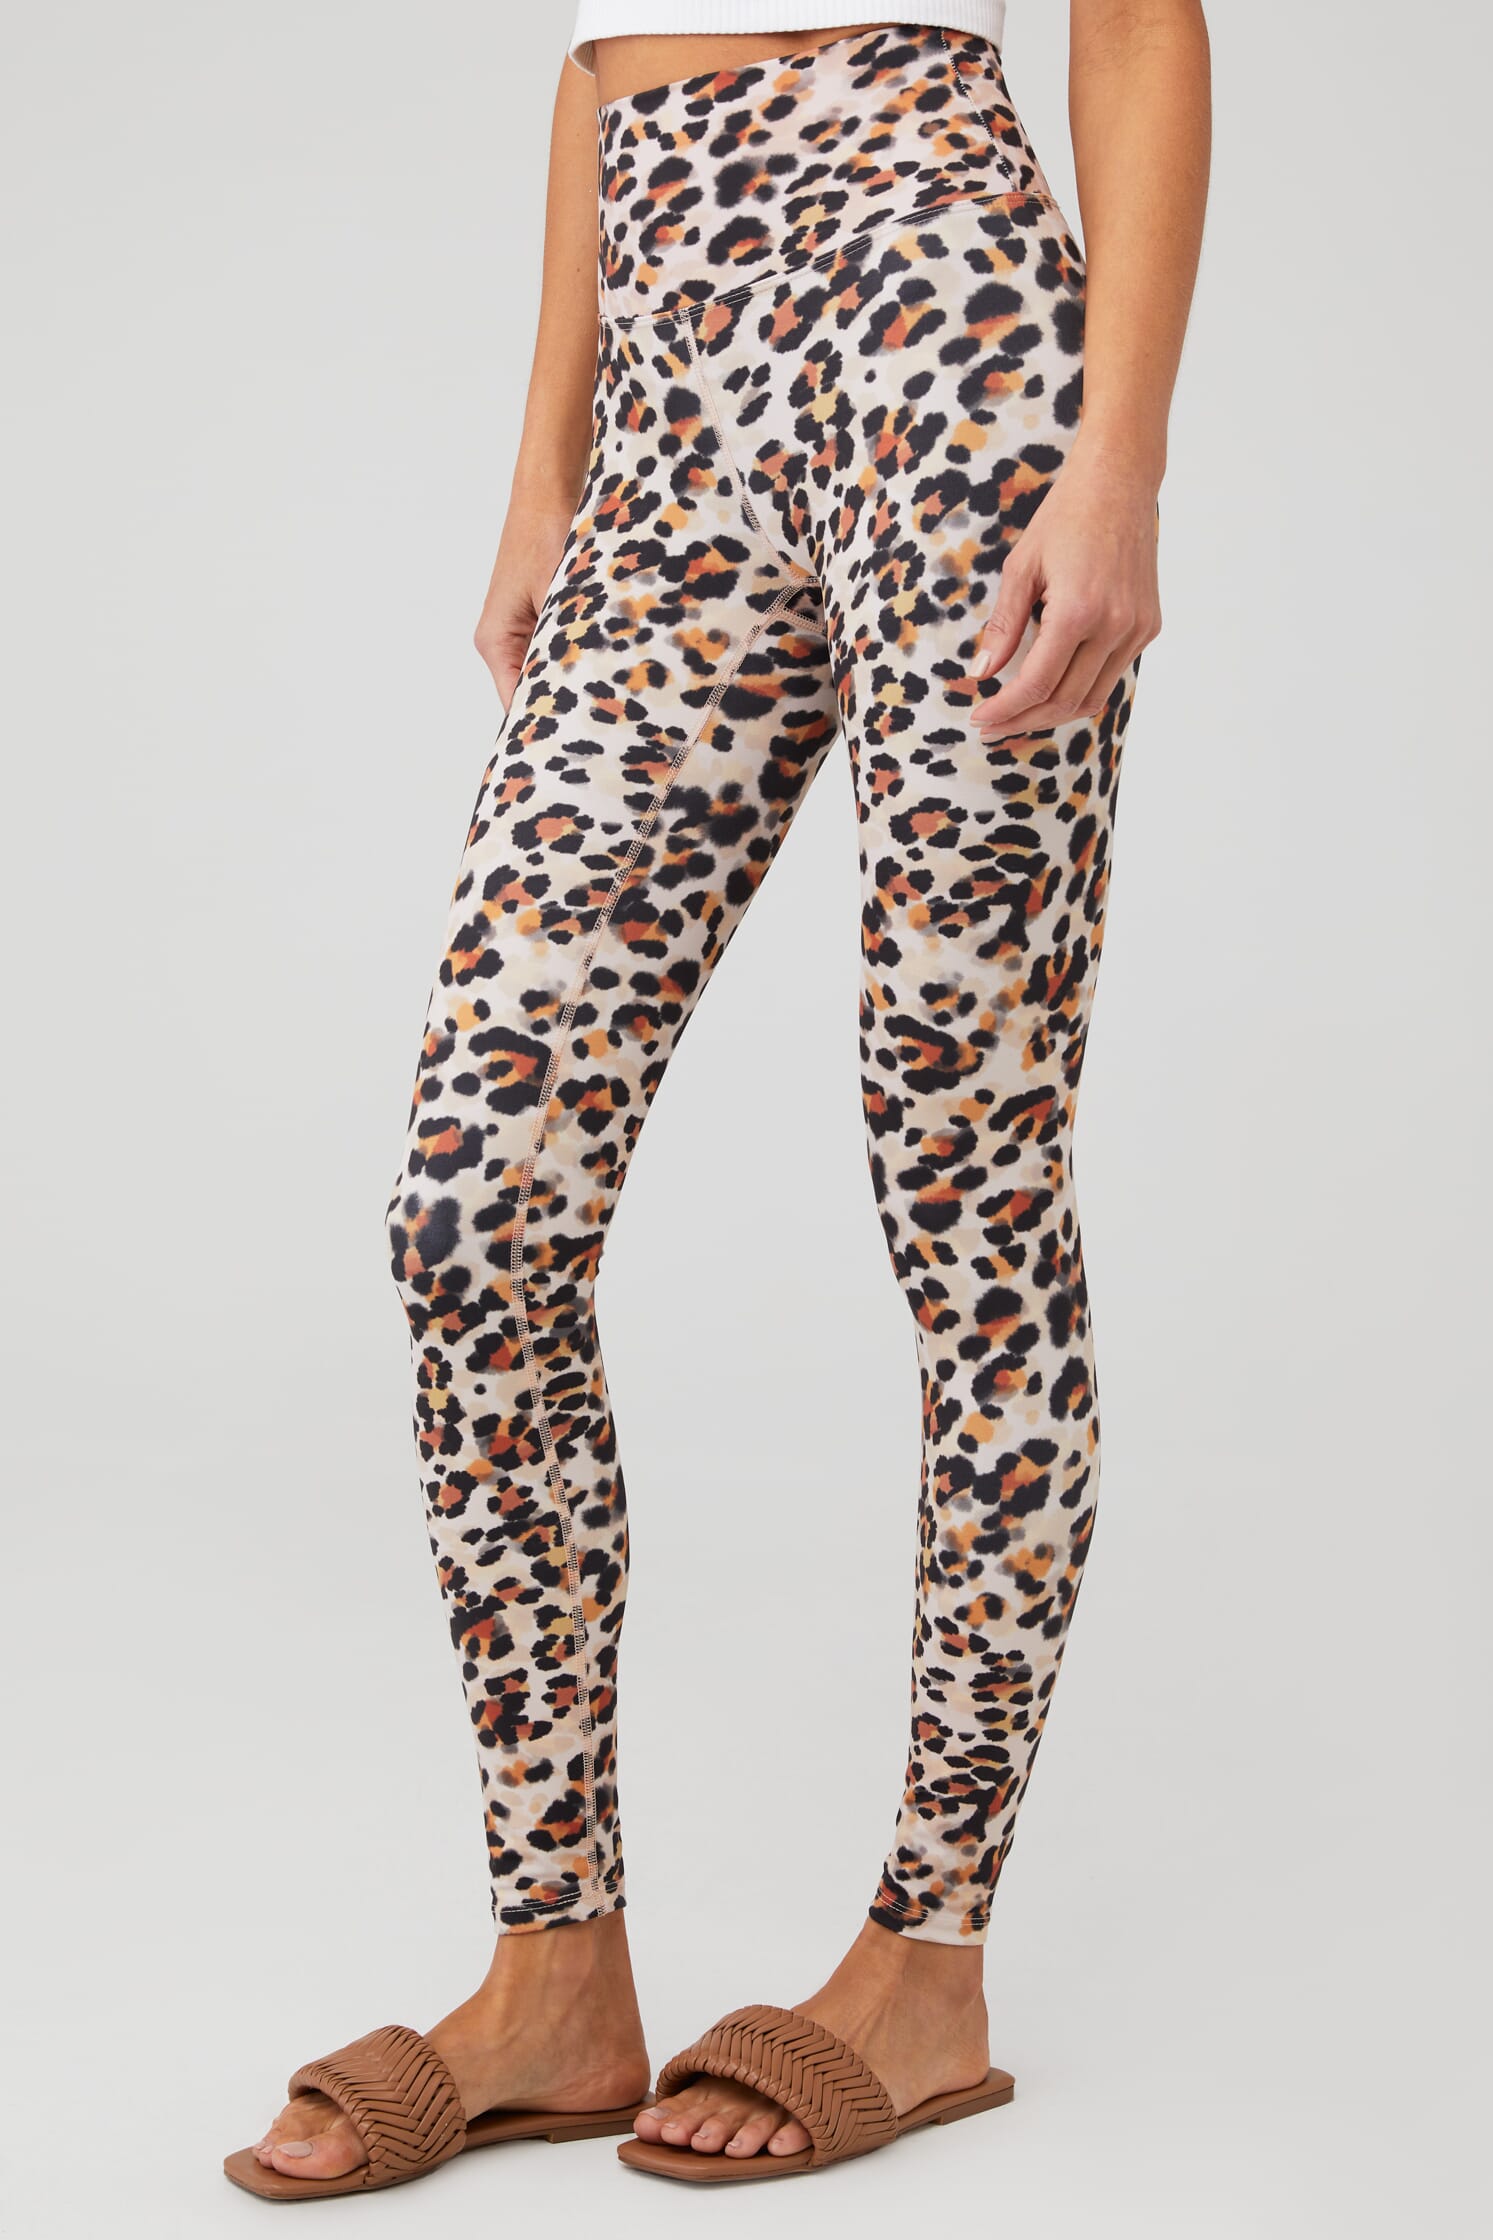 https://images.fashionpass.com/products/piper-legging-1-beach-riot-watercolor-leopard-579-2.jpg?profile=a